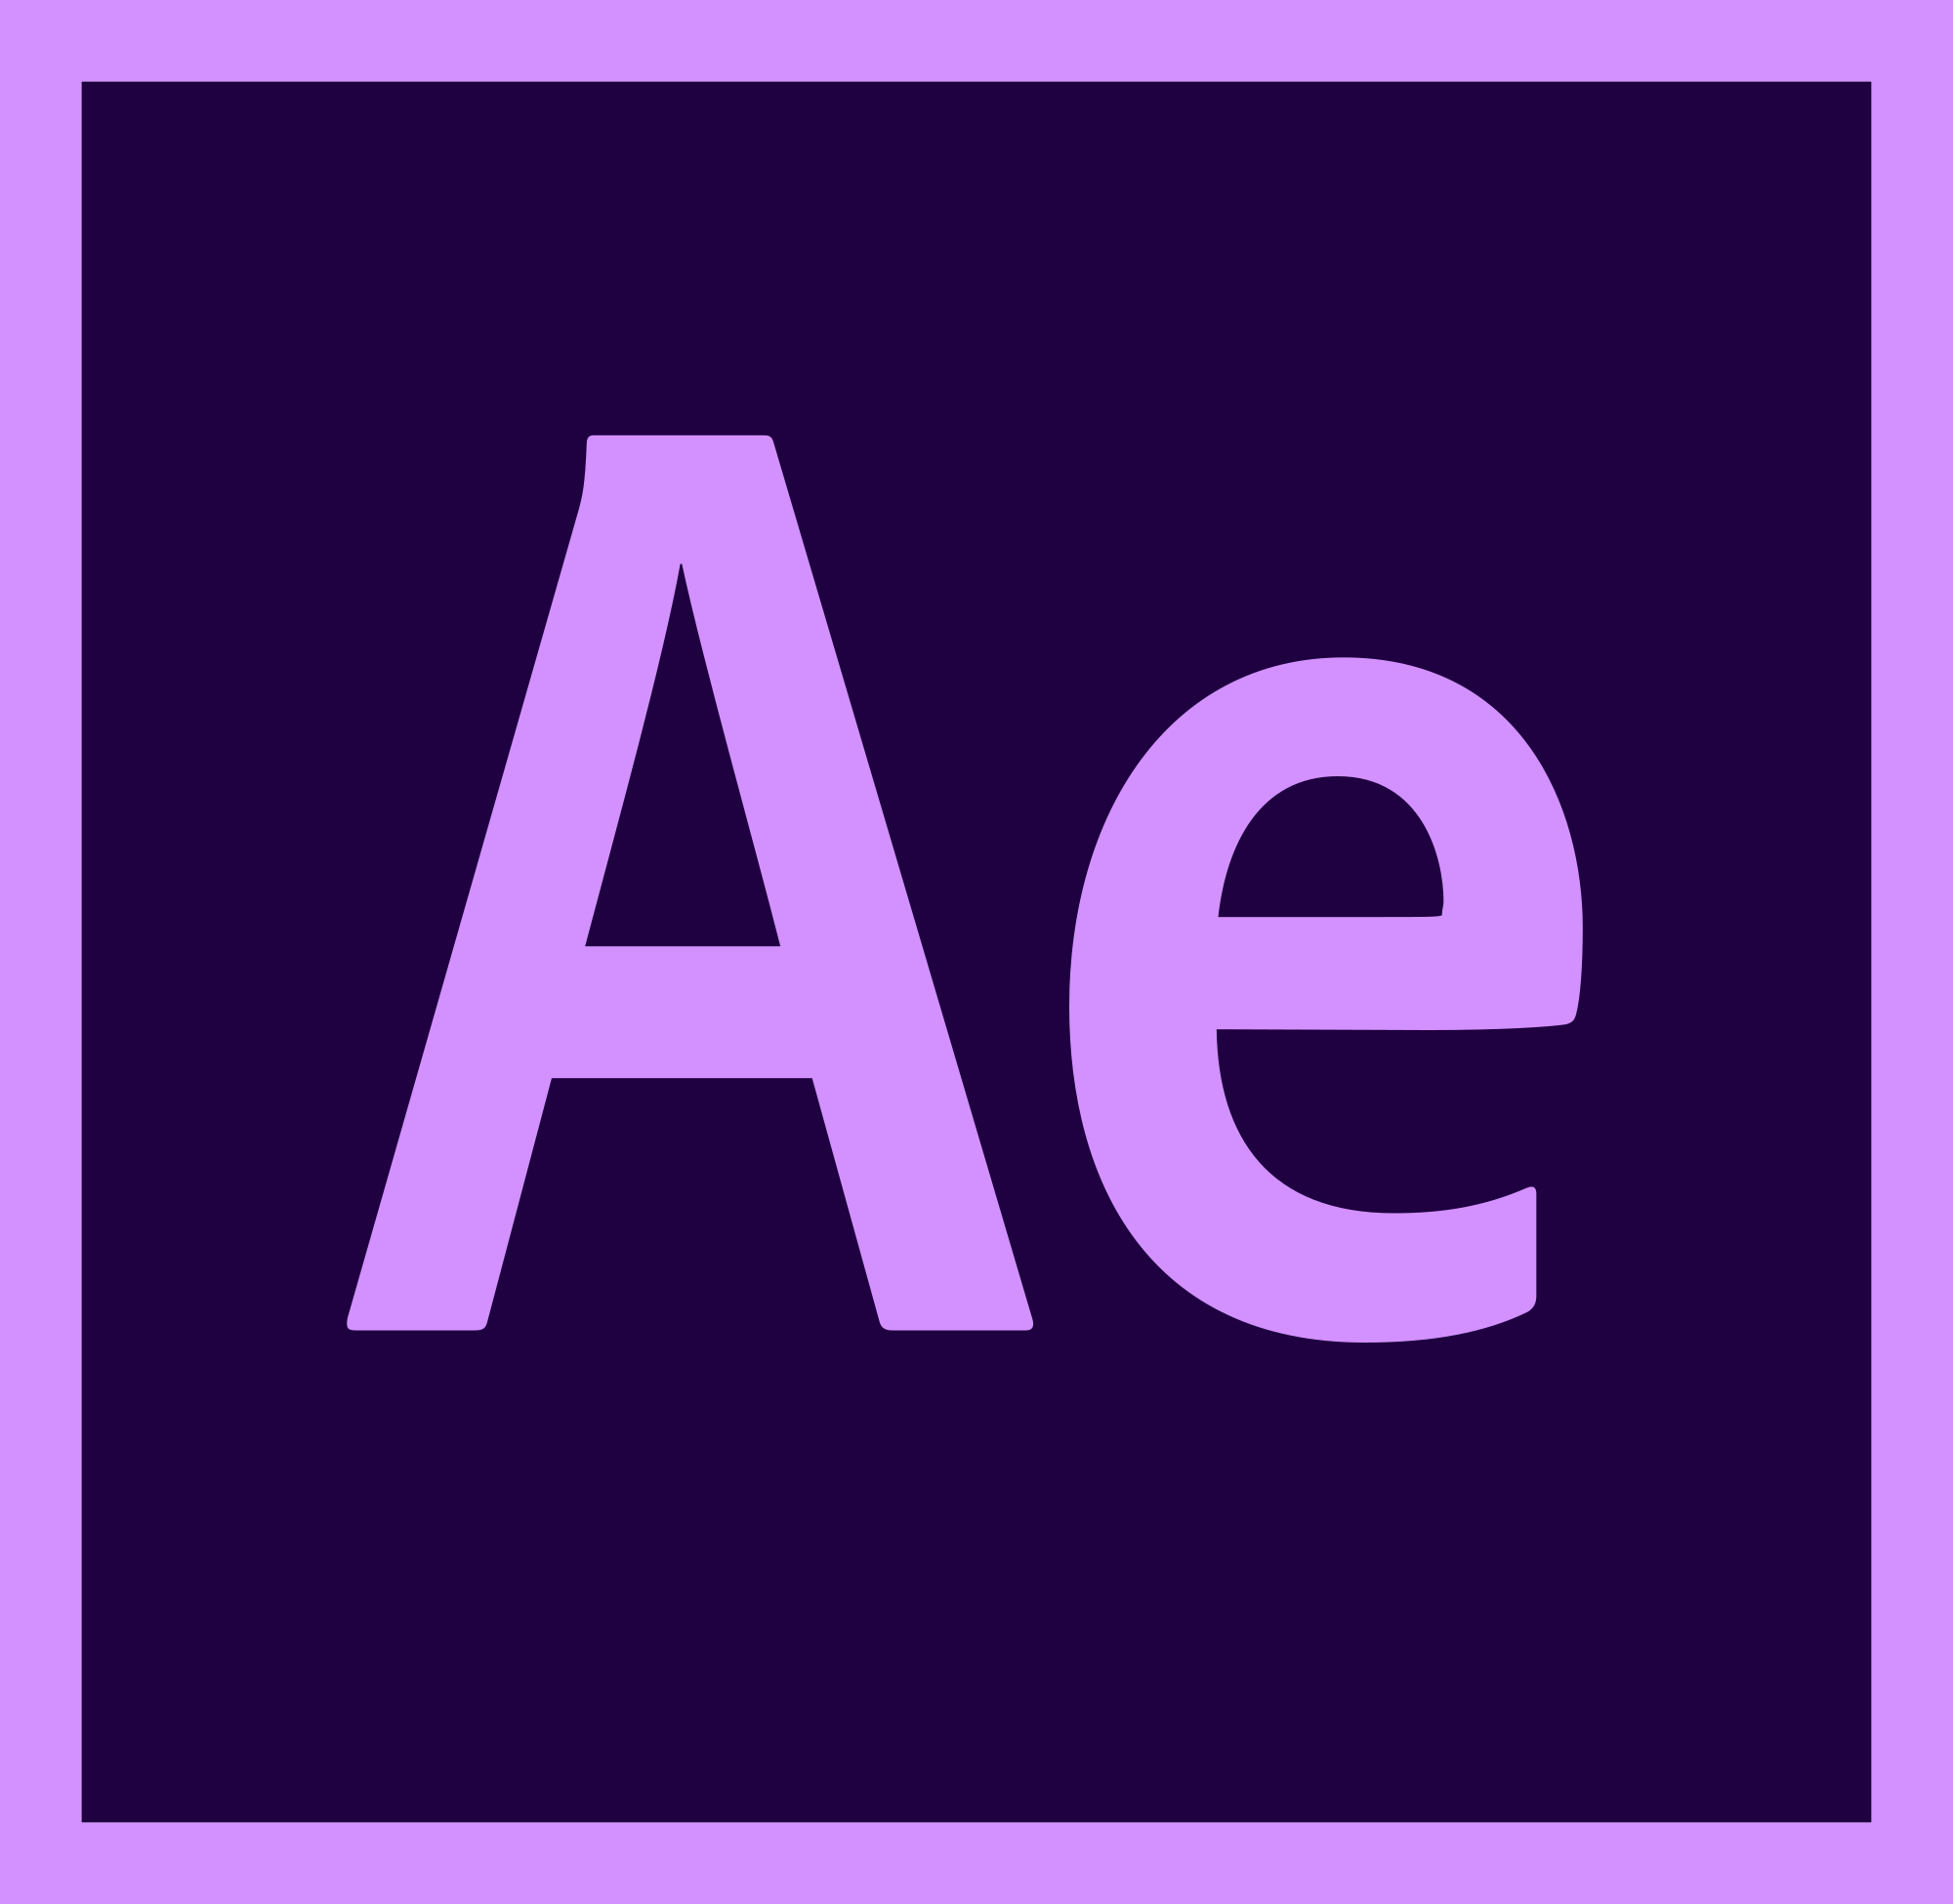 after effects 2021 mac free download